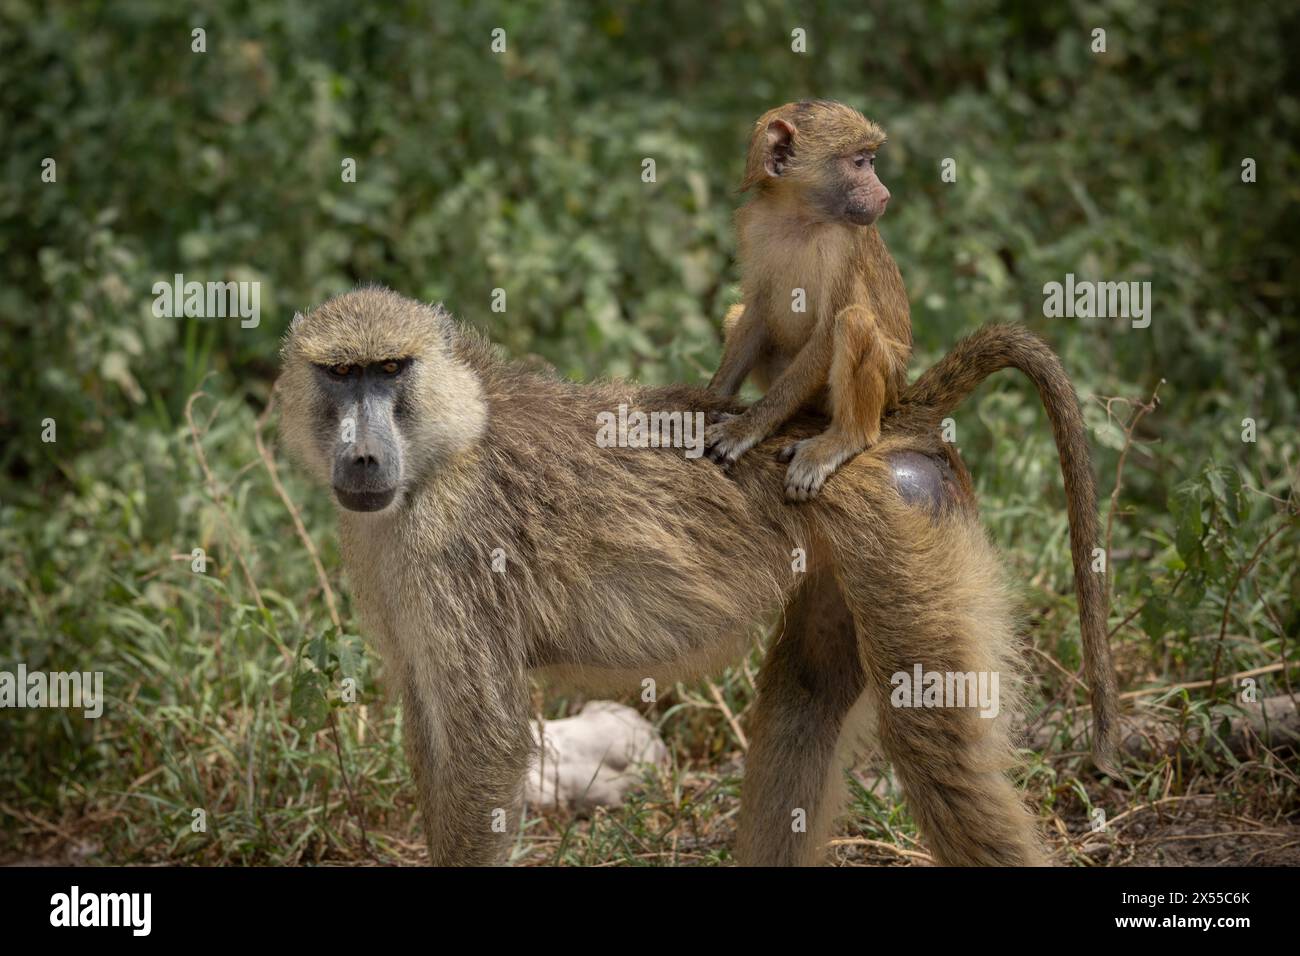 A baby baboon rides on its mother's back at Amboseli National Park in Kajiado County, Kenya, East Africa. Stock Photo